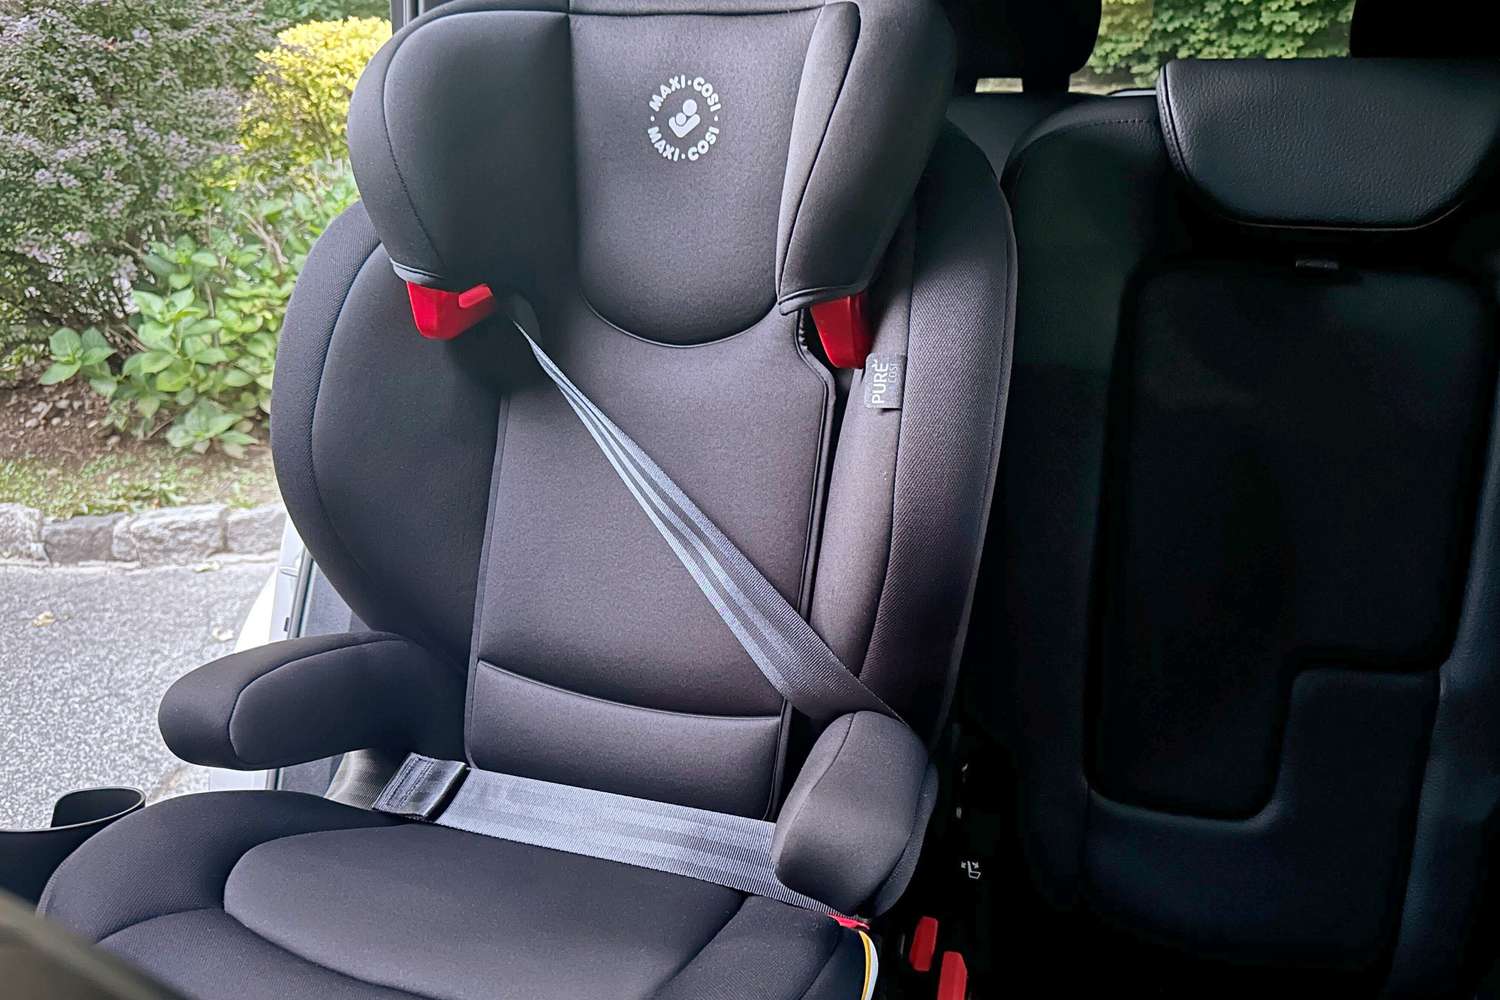 The Maxi-Cosi RodiSport Booster Car Seat installed in a car